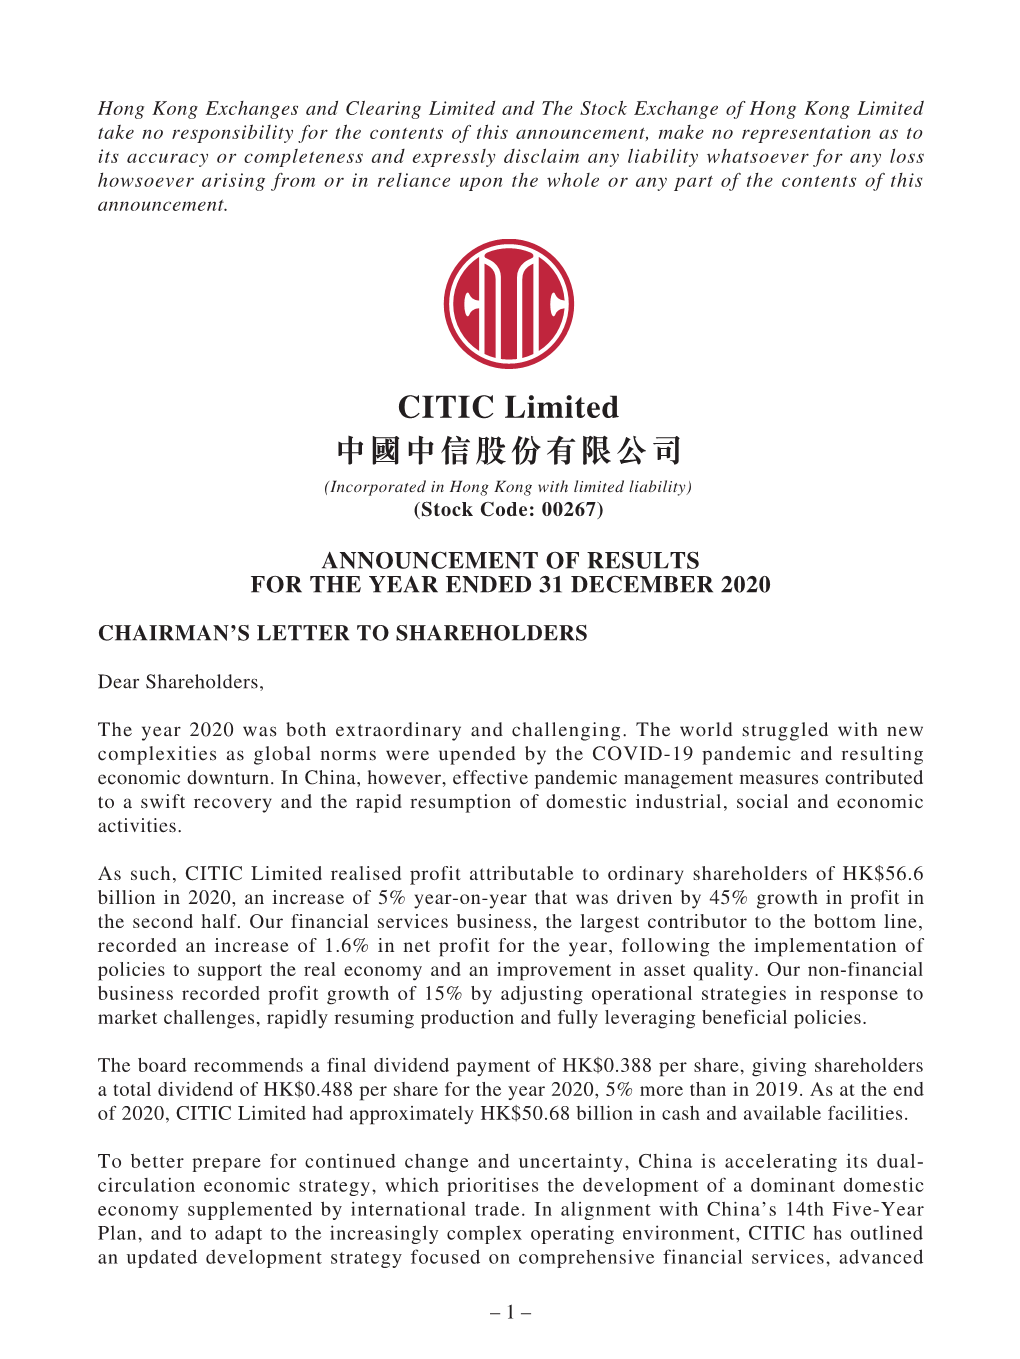 CITIC Limited 中國中信股份有限公司 (Incorporated in Hong Kong with Limited Liability) (Stock Code: 00267)